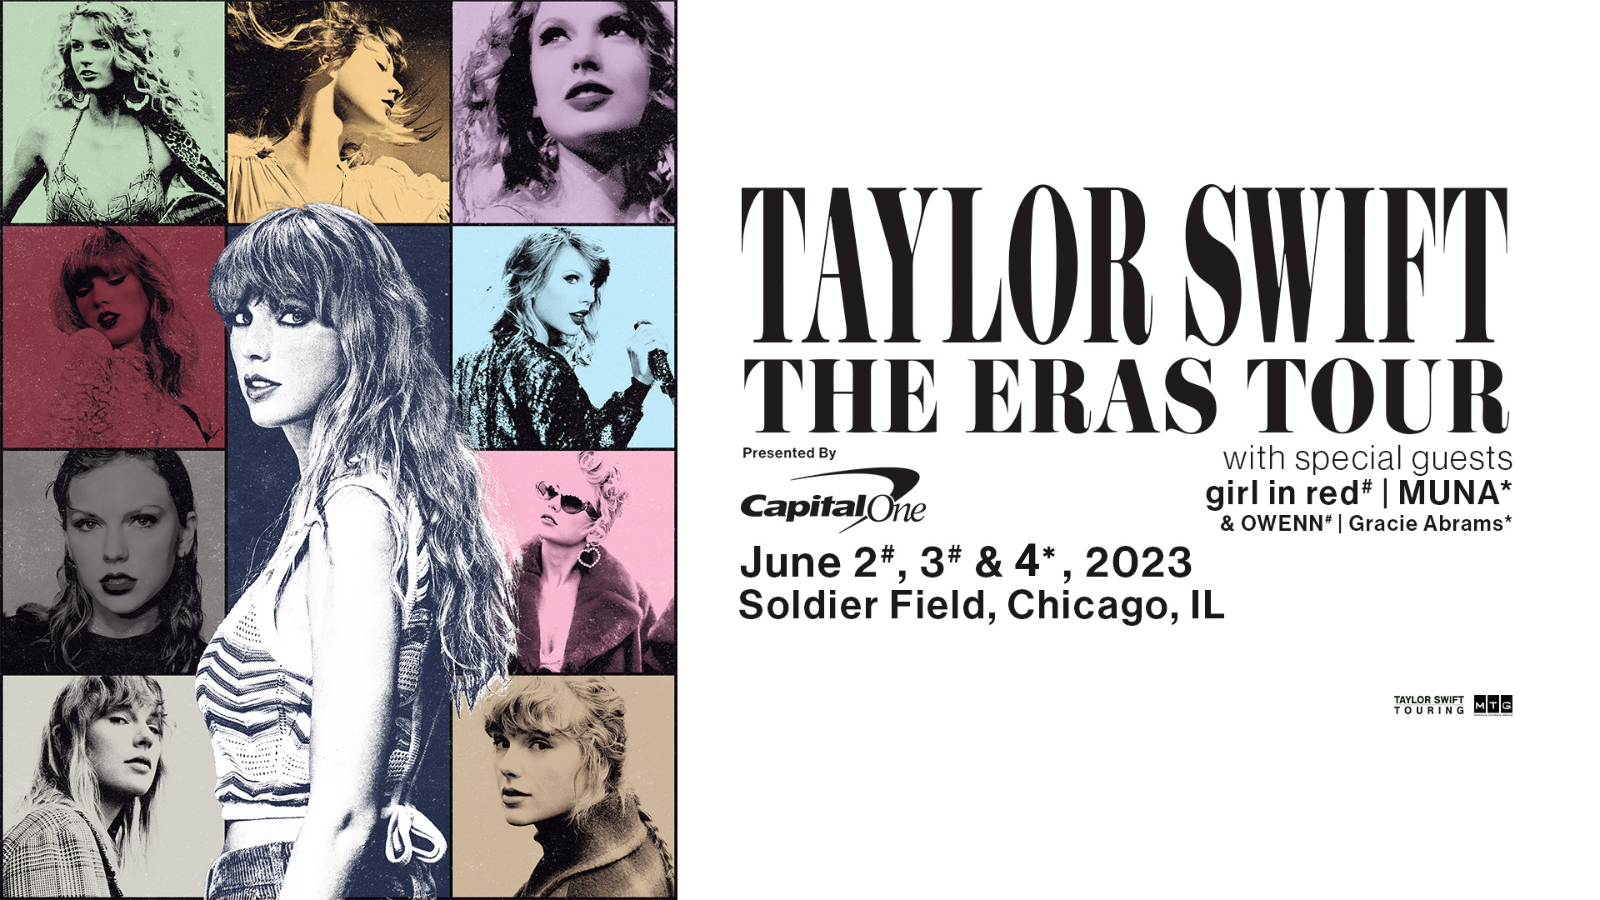 Get Ready for an Epic Night: Taylor Swift Returns to Chicago for The Eras Tour! 12